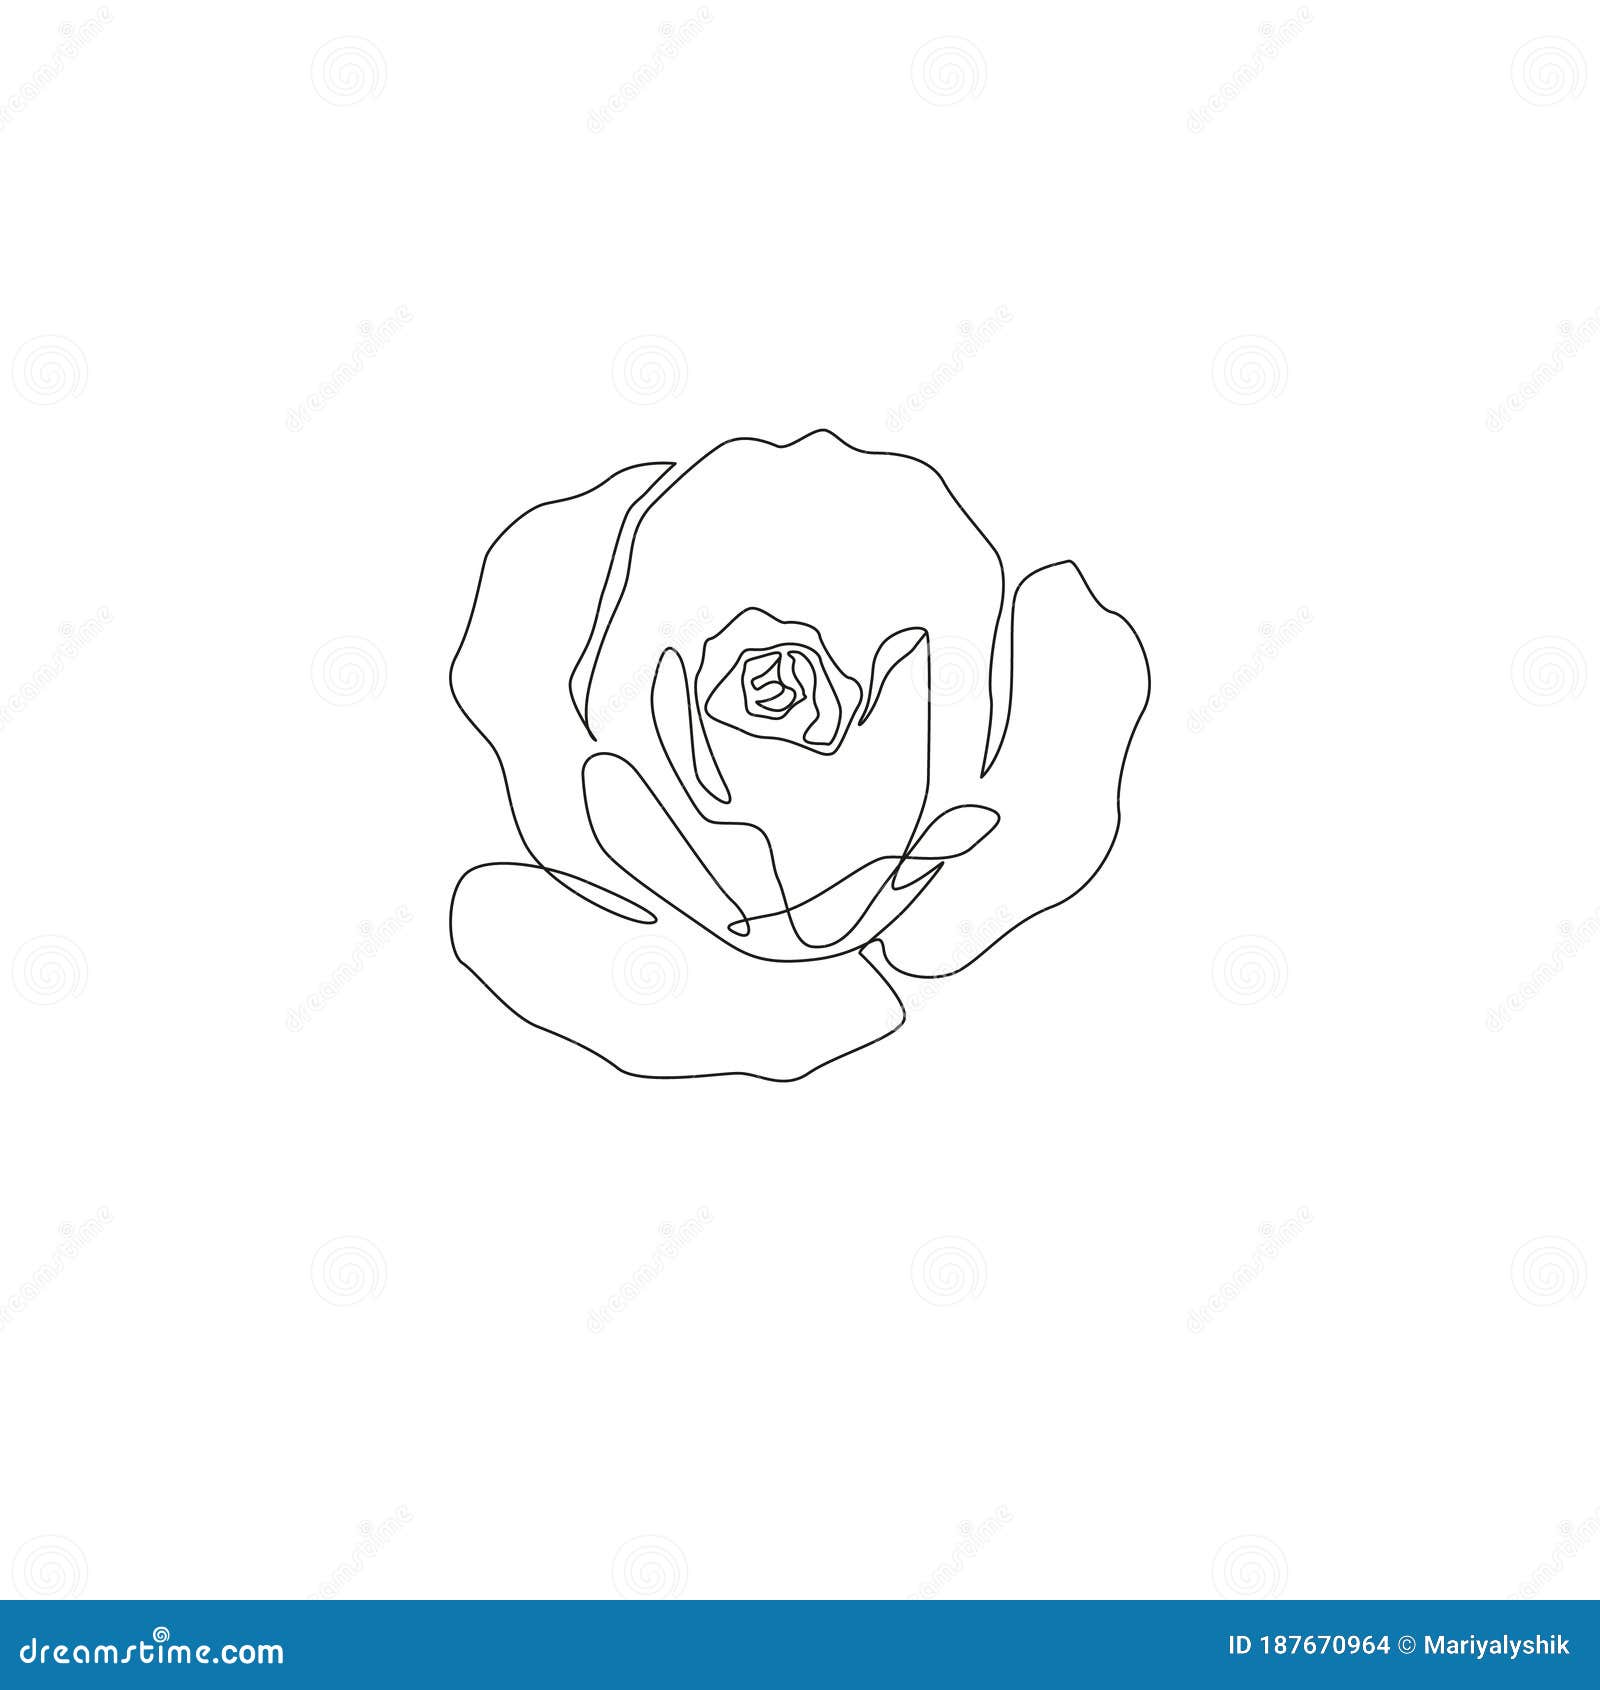 Collection of flowers and women in one line drawing style on white  background Download a Free Previ  Line art tattoos Line drawing tattoos  Flower line drawings